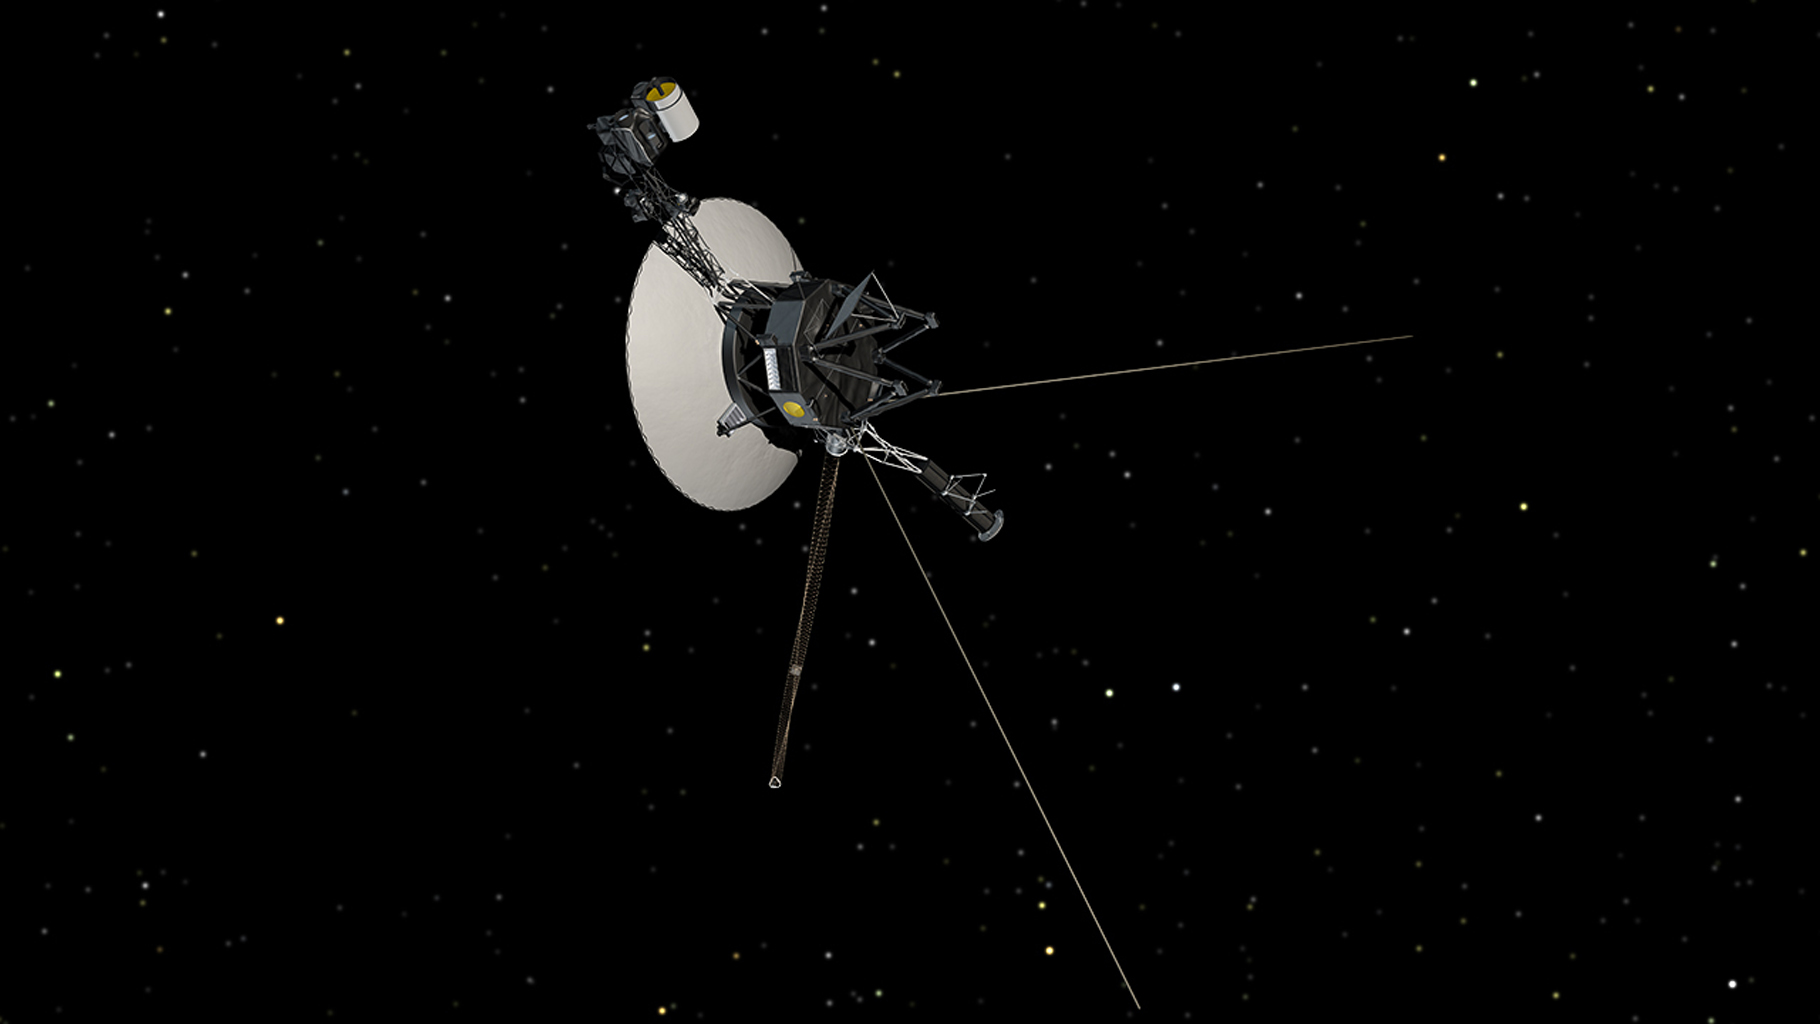 A Voyager spacecraft against a background of stars.